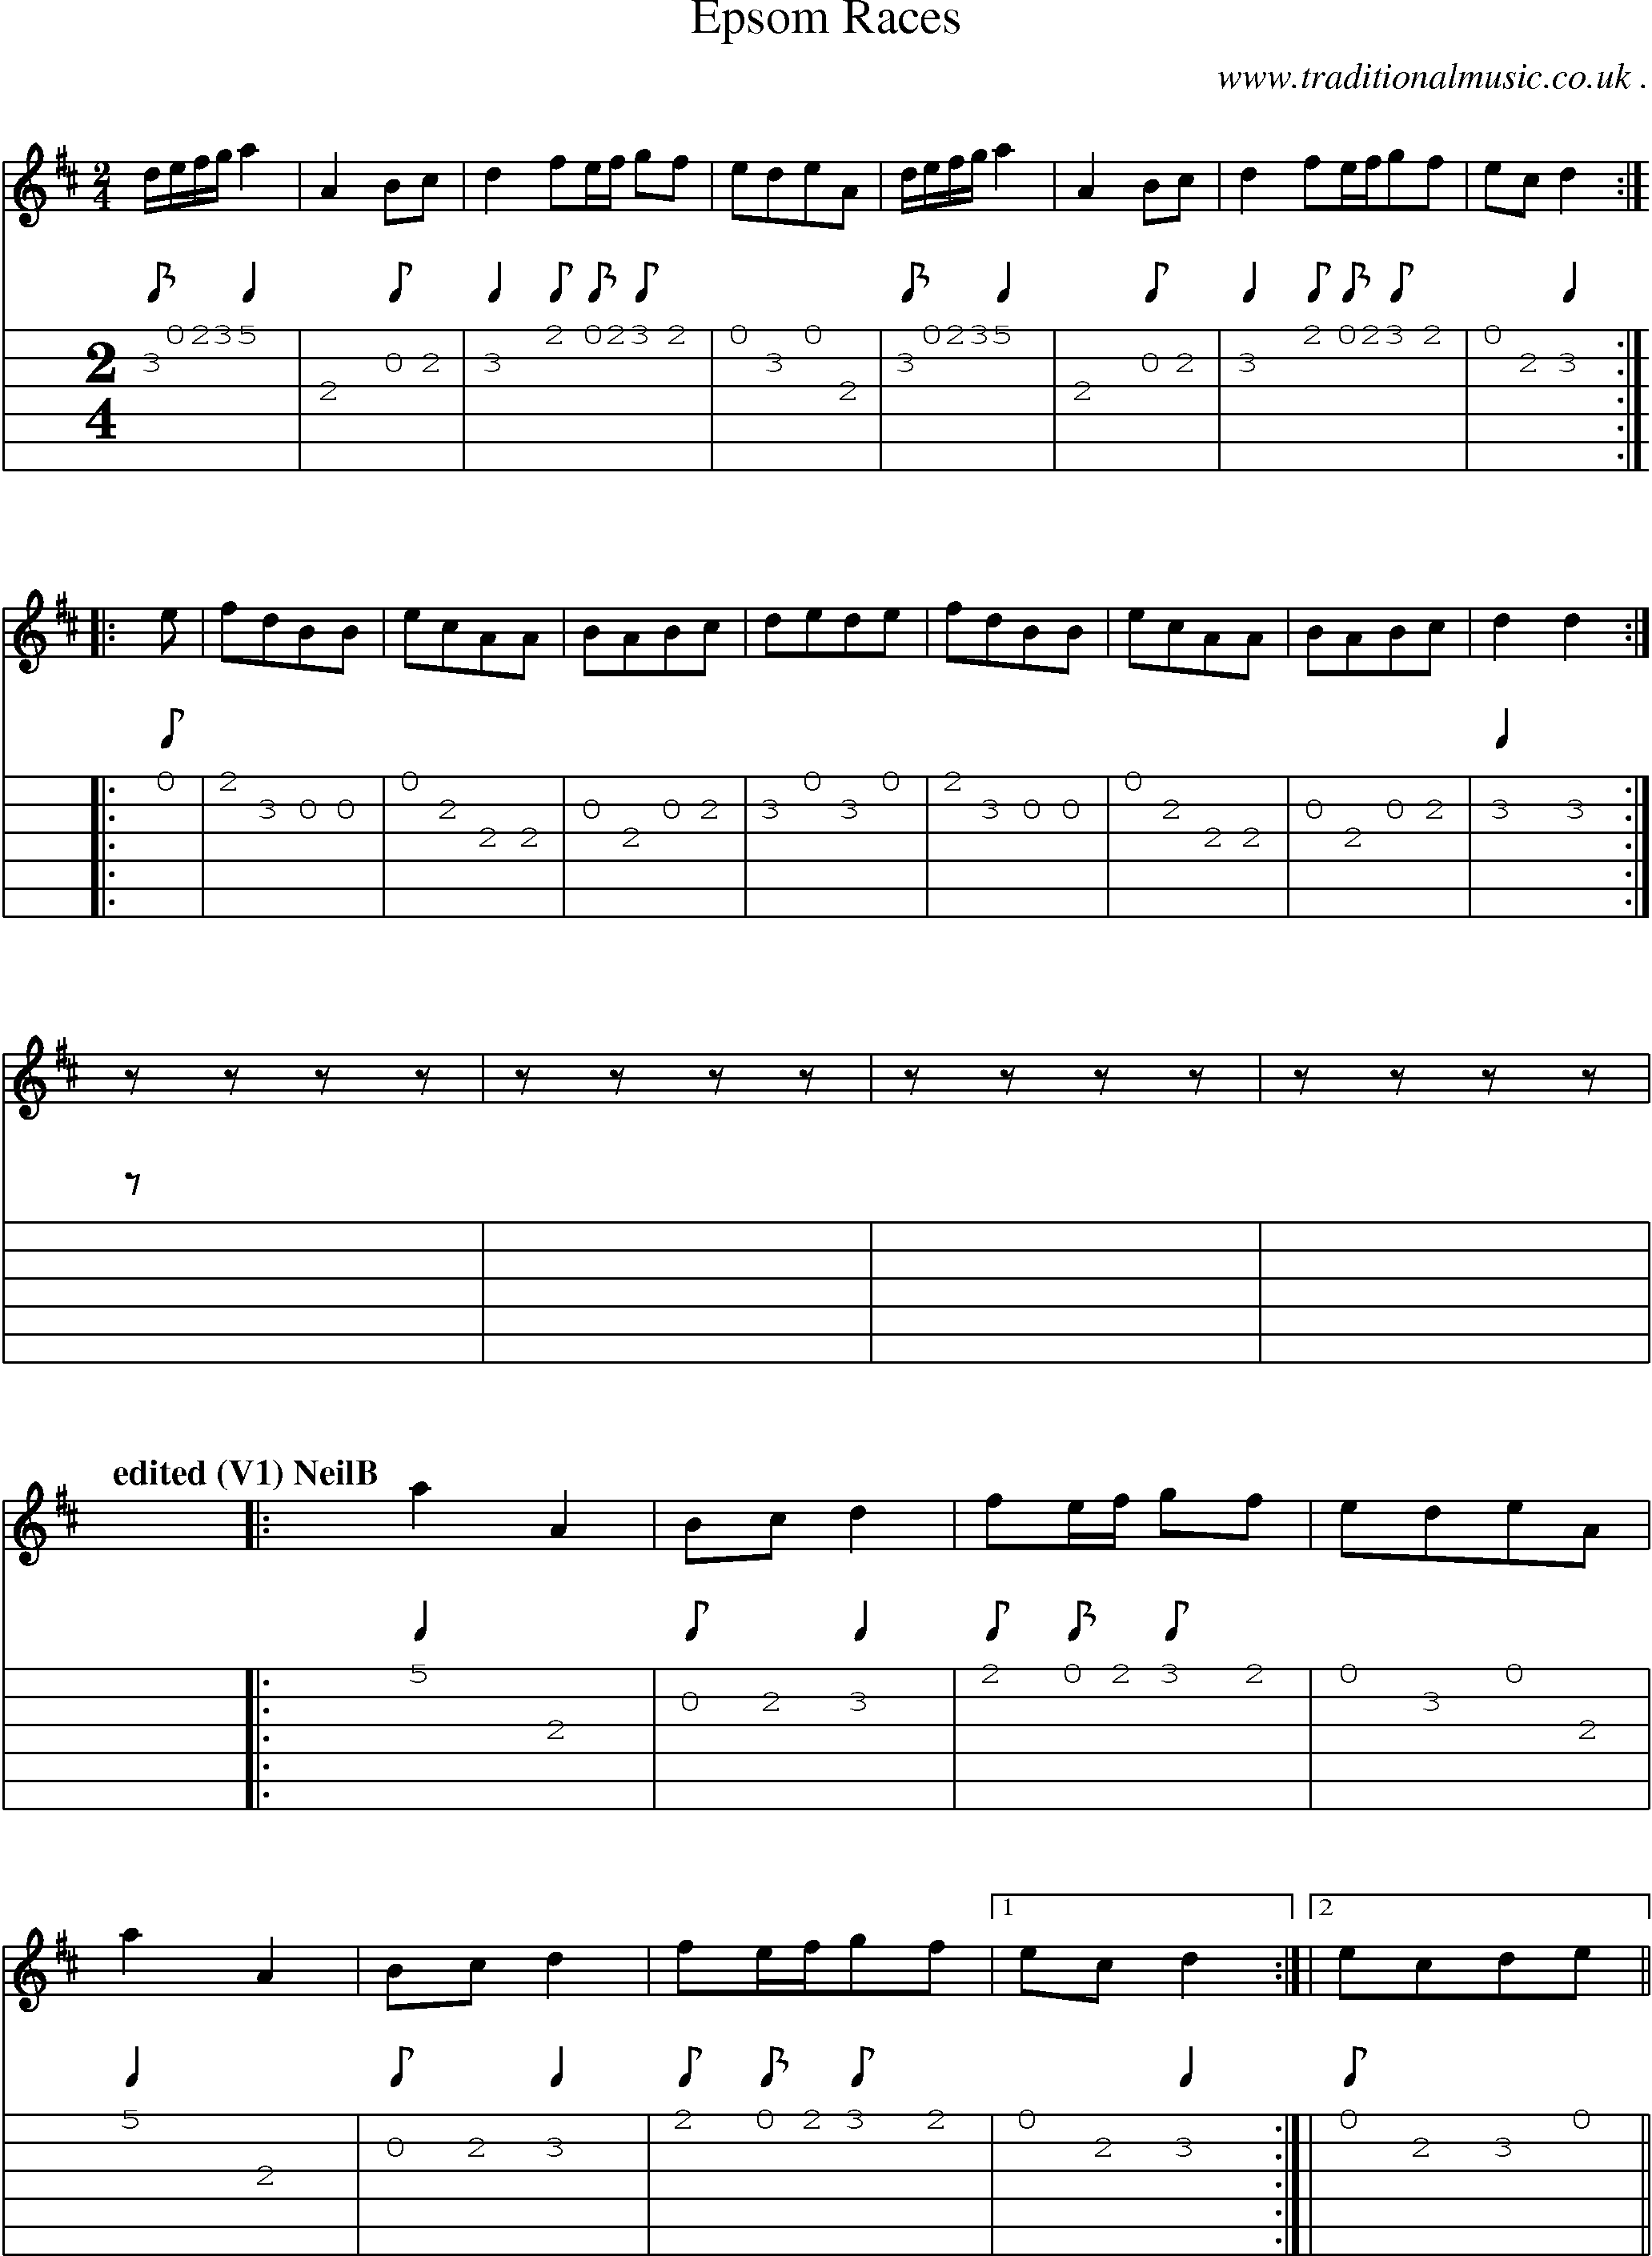 Sheet-Music and Guitar Tabs for Epsom Races